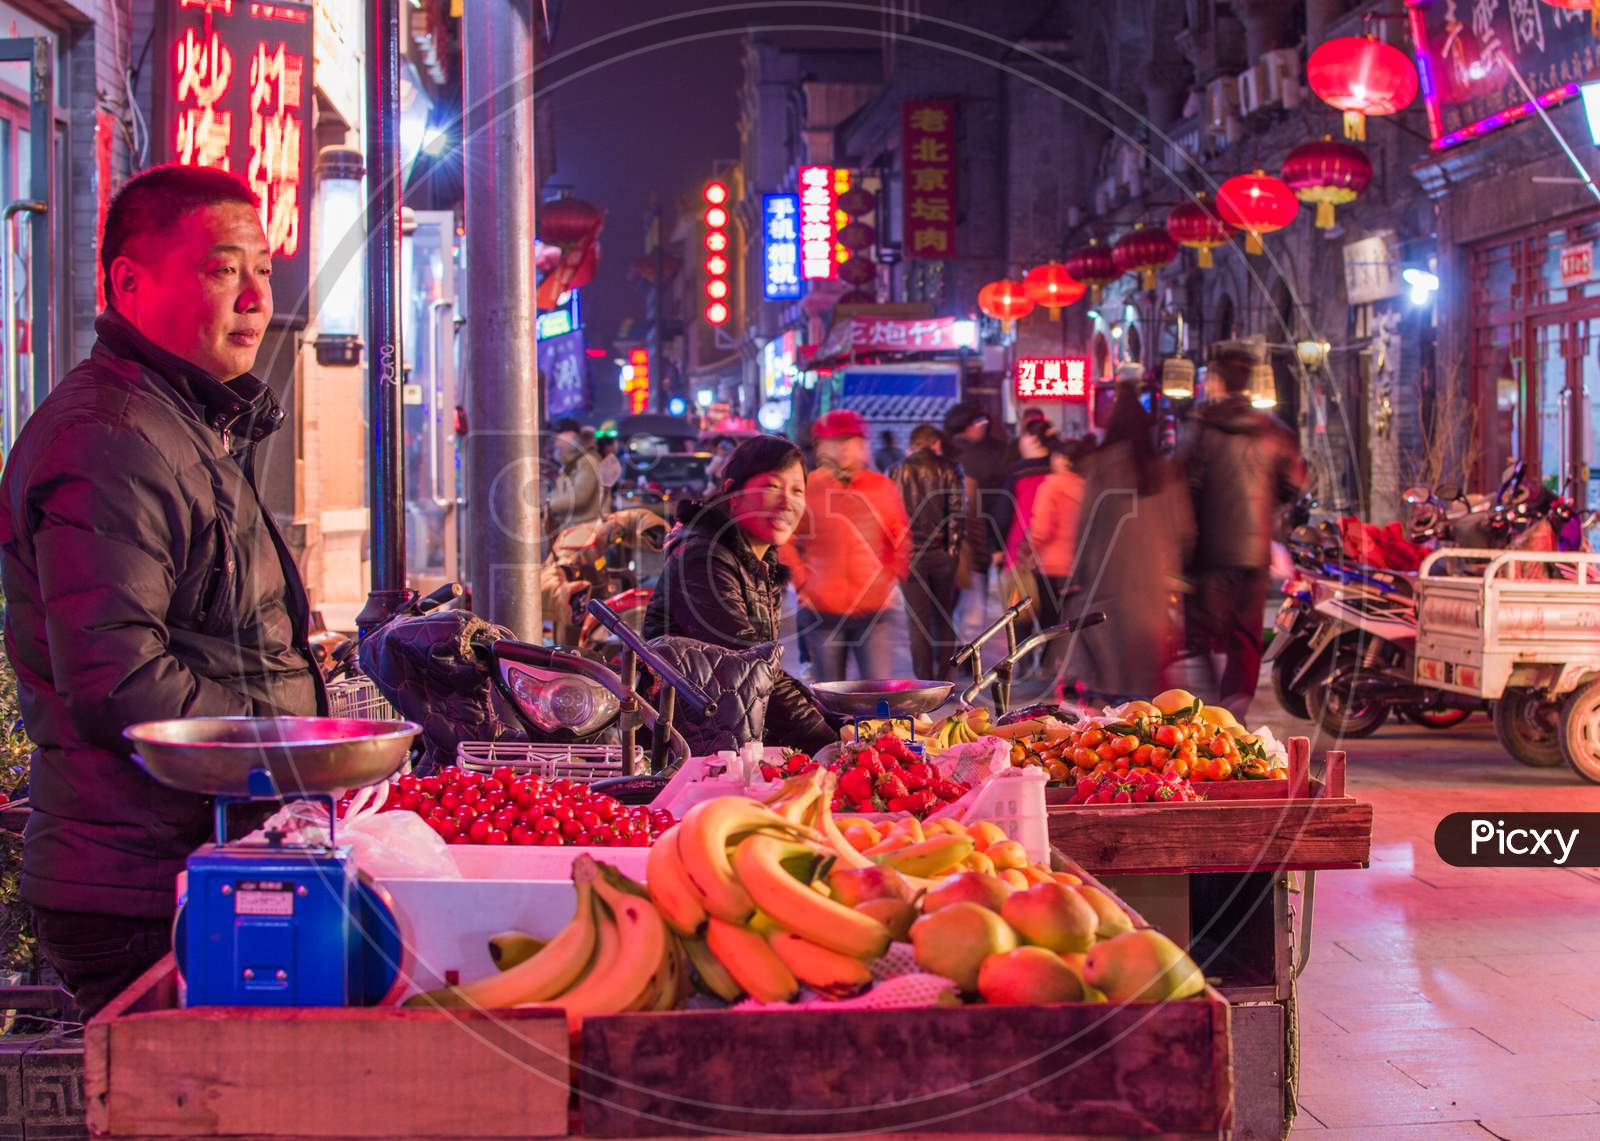 Street Vendors Selling Fruits In Old Qianmen Street In Beijing, China